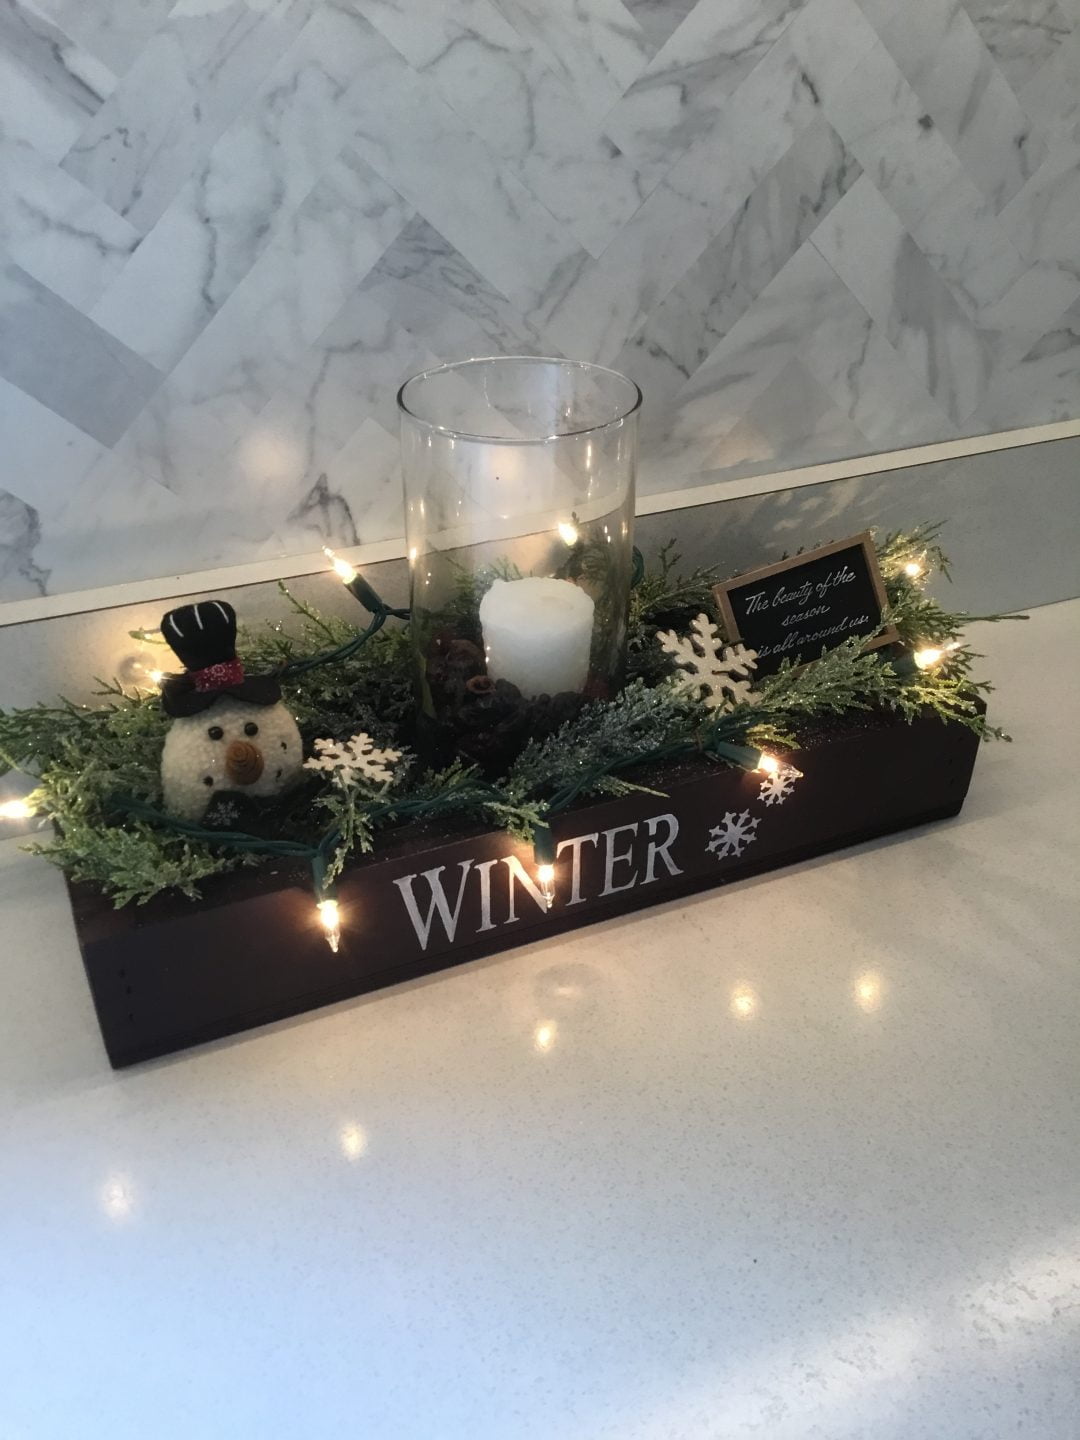 Winter Candle Box with Lights and Snowman